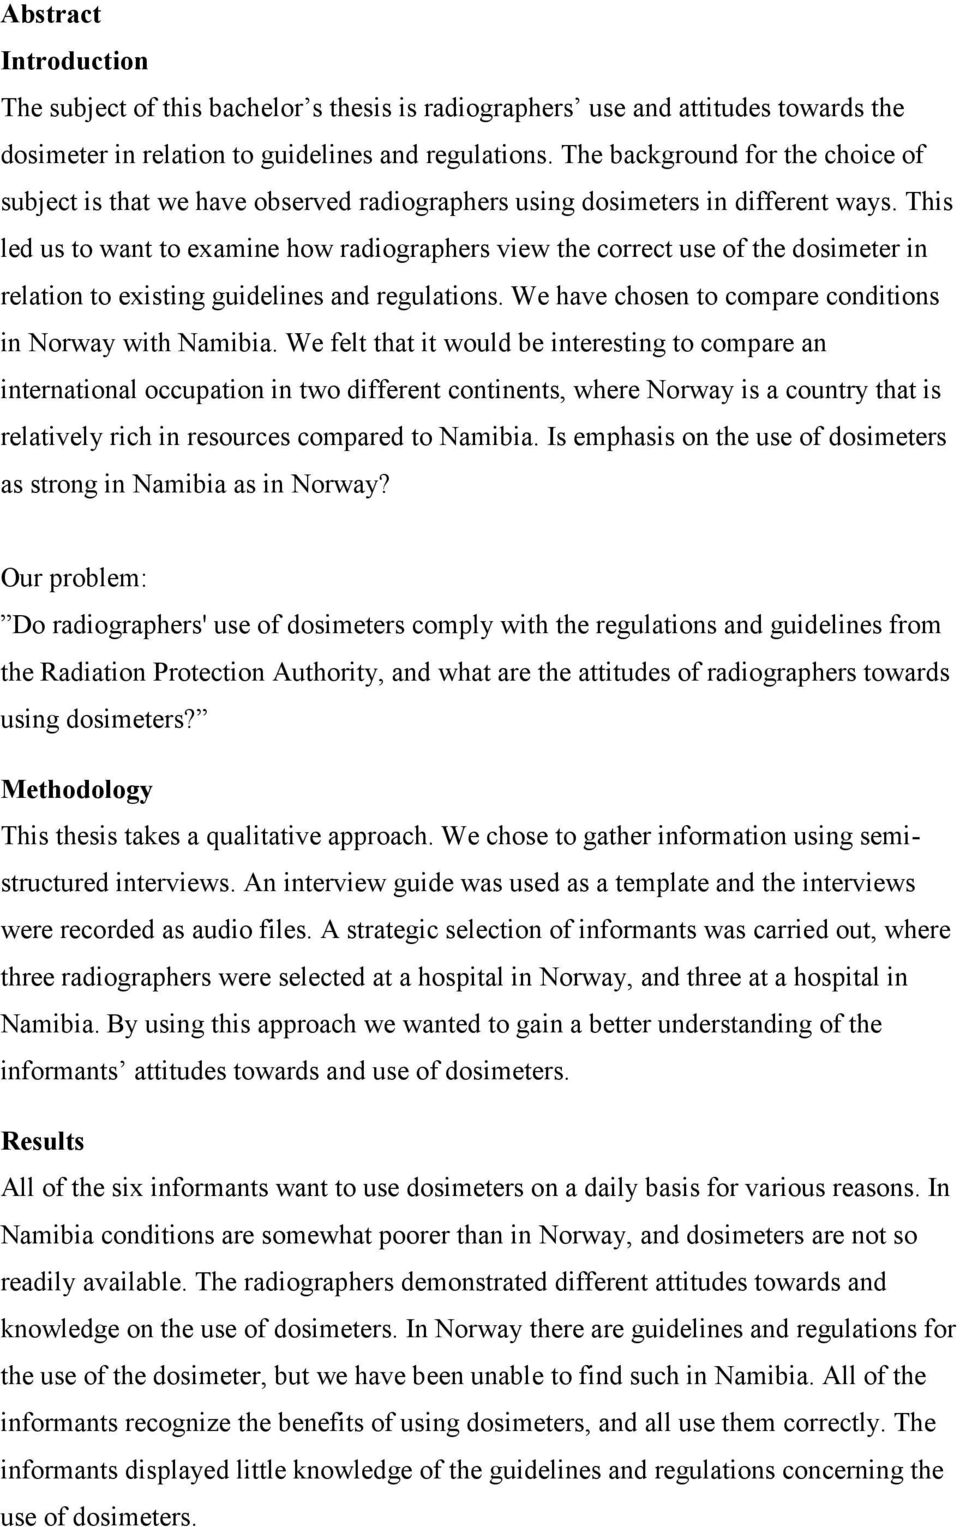 This led us to want to examine how radiographers view the correct use of the dosimeter in relation to existing guidelines and regulations. We have chosen to compare conditions in Norway with Namibia.